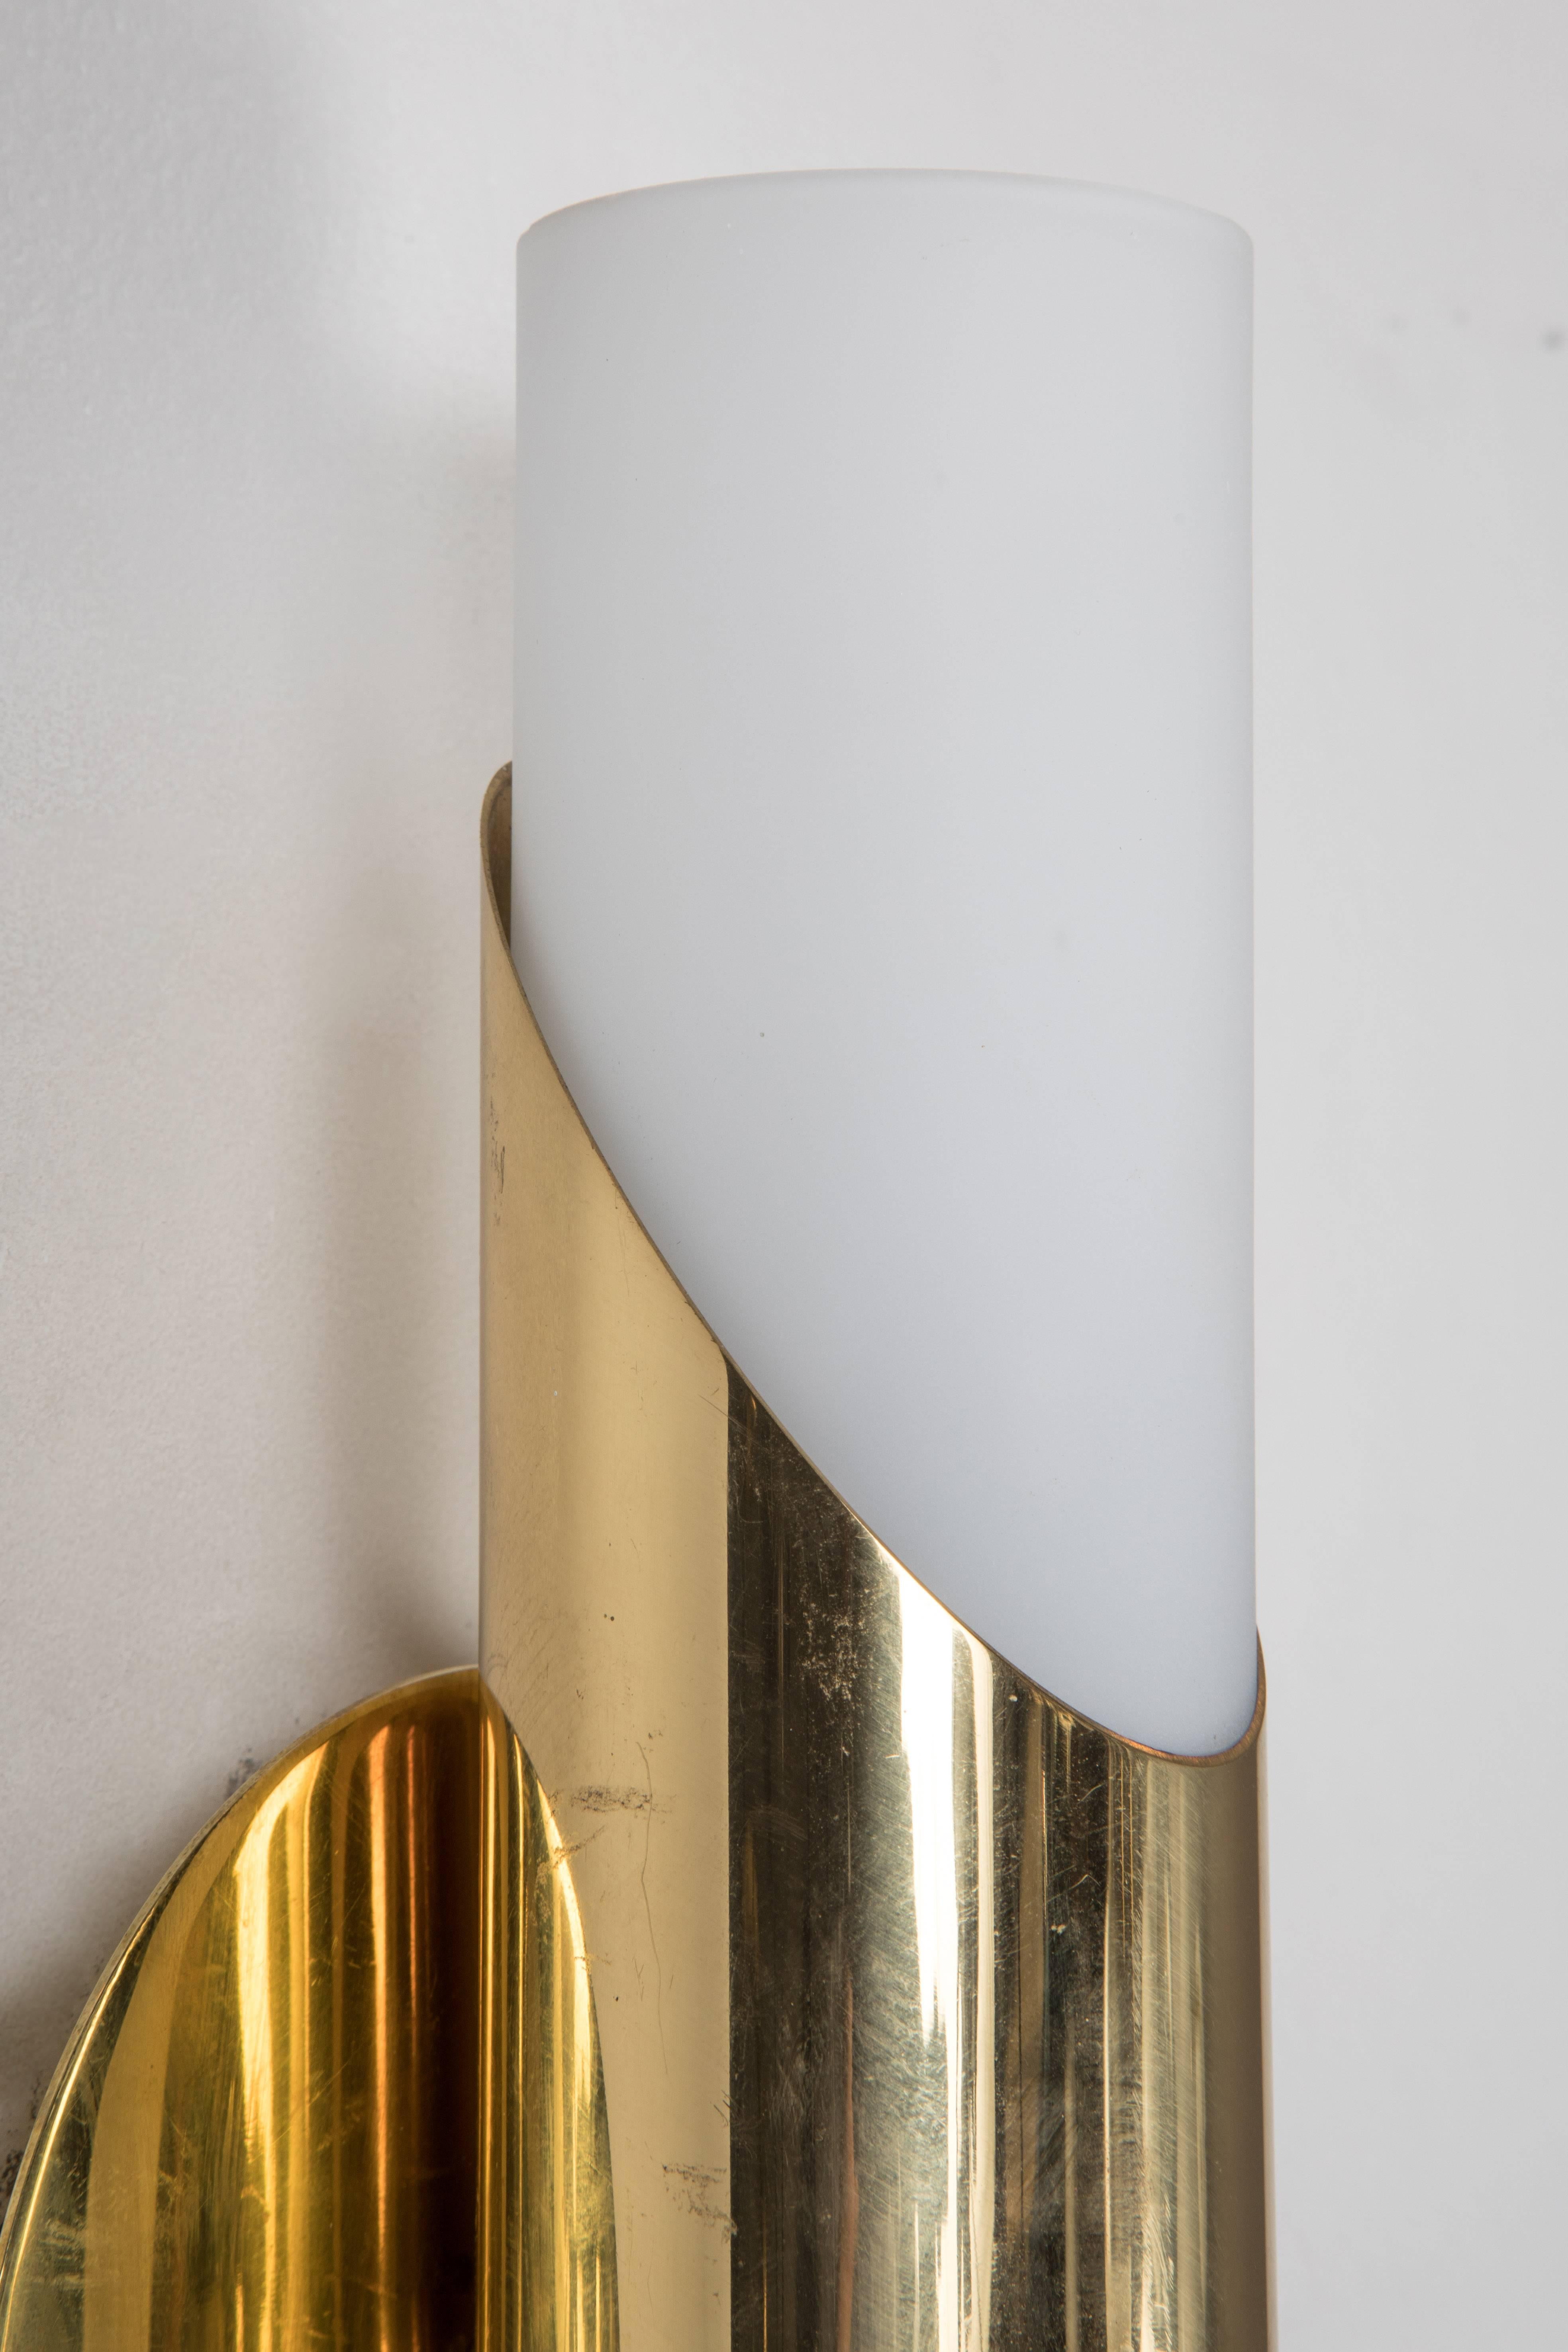 1960s Neuhaus Leuchten glass and brass sconces. A clean and elegant Minimalist design influenced in equal parts by Scandinavian Modernism and the more refined work of Maija Liisa Komulainen.

Available for viewing or purchase at Two Enlighten Los